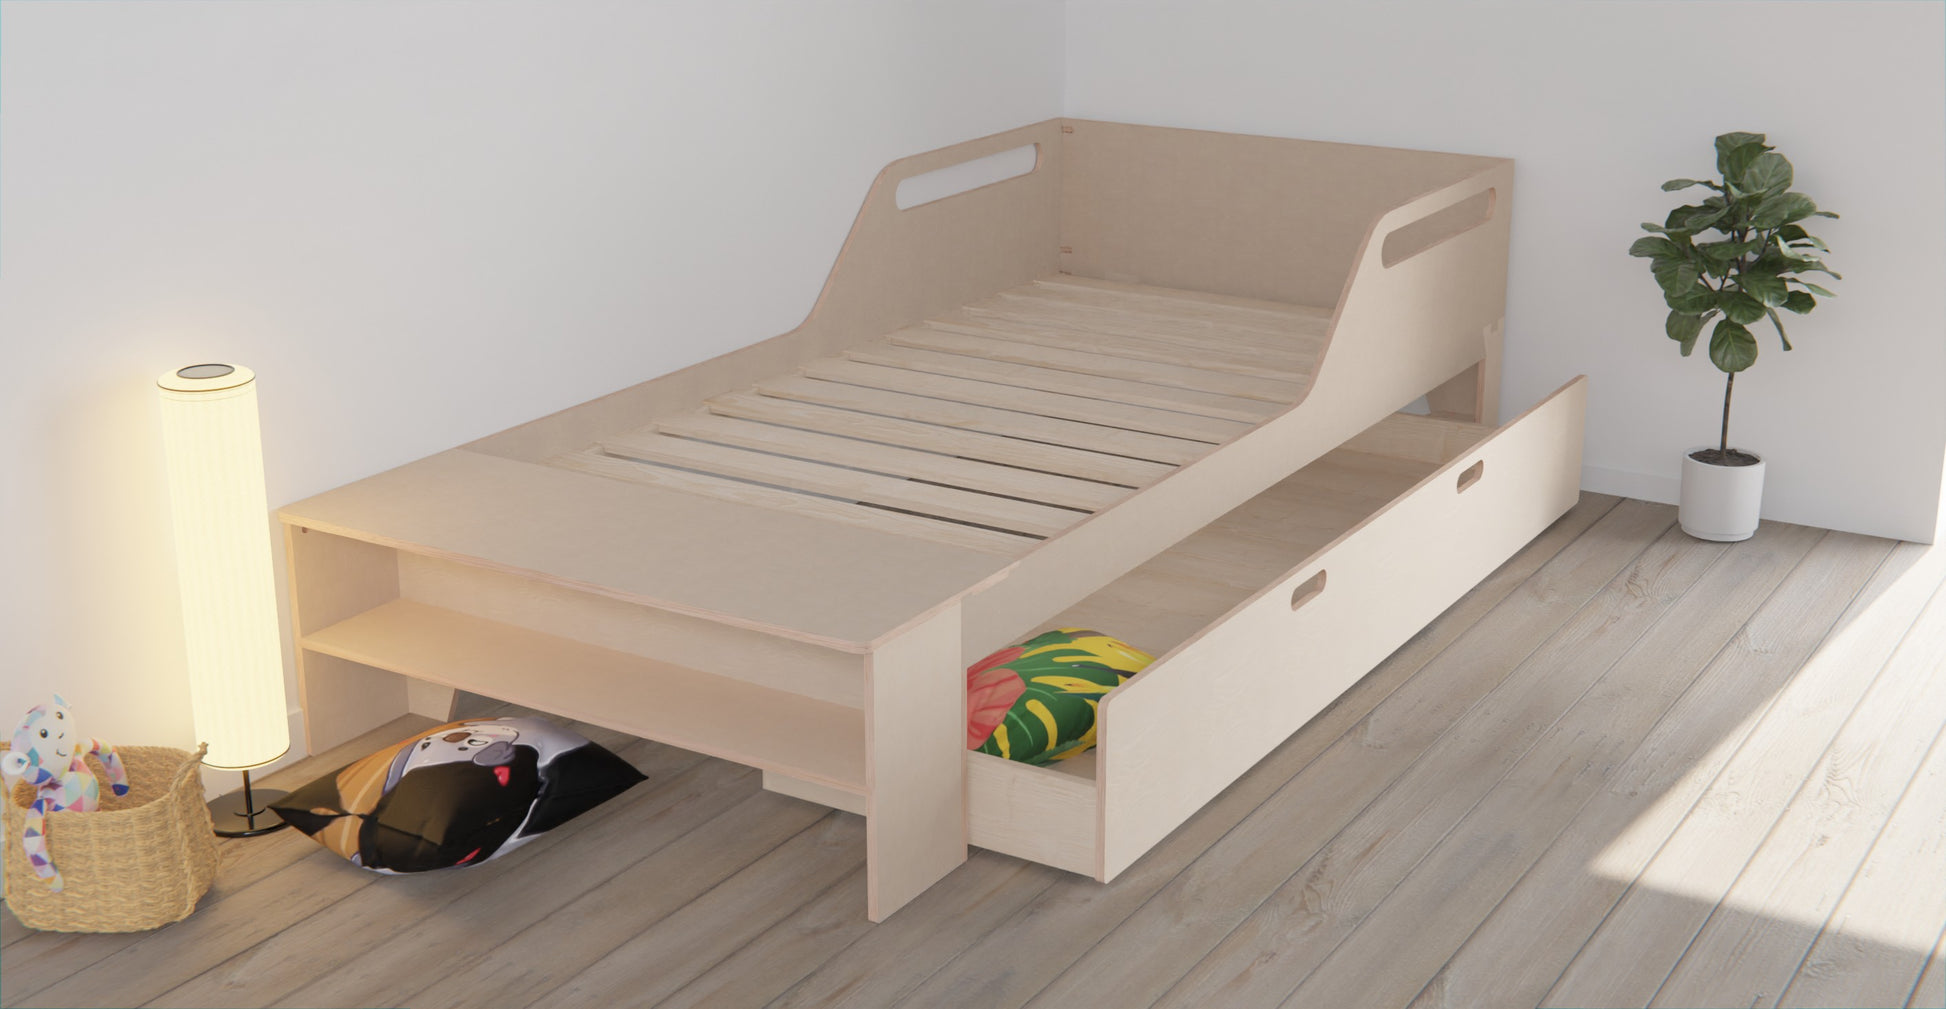  Stylish space-saving bed frame for kids & adults. Includes storage drawer & customisable guardrails. Upgrade your bedroom now!